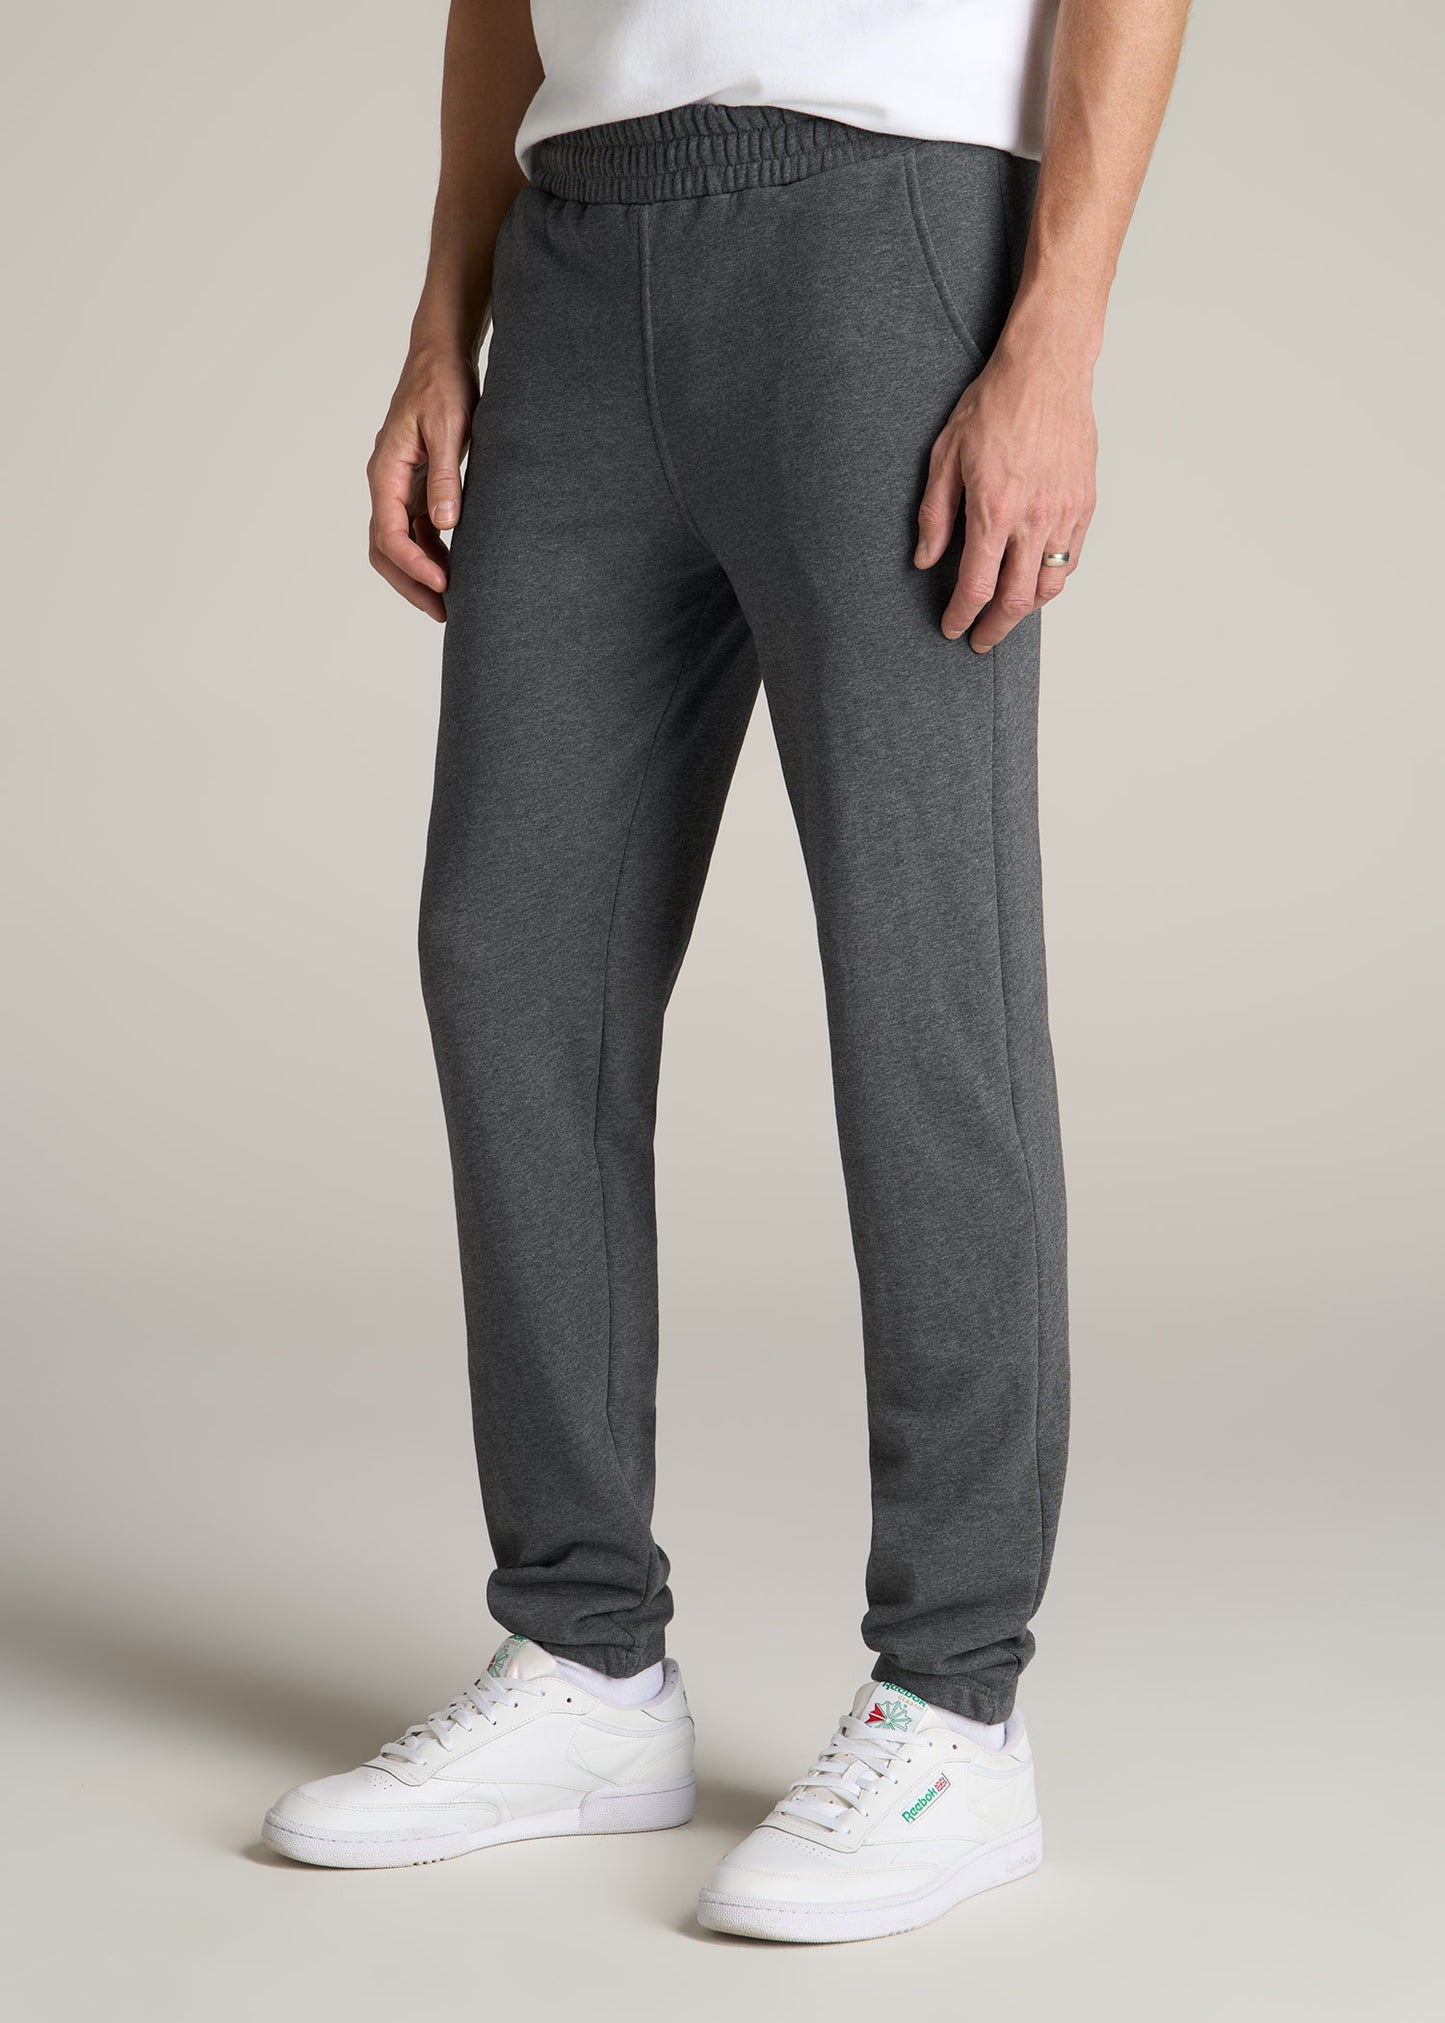 Wearever French Terry Sweatpants for Tall Men in Charcoal Mix